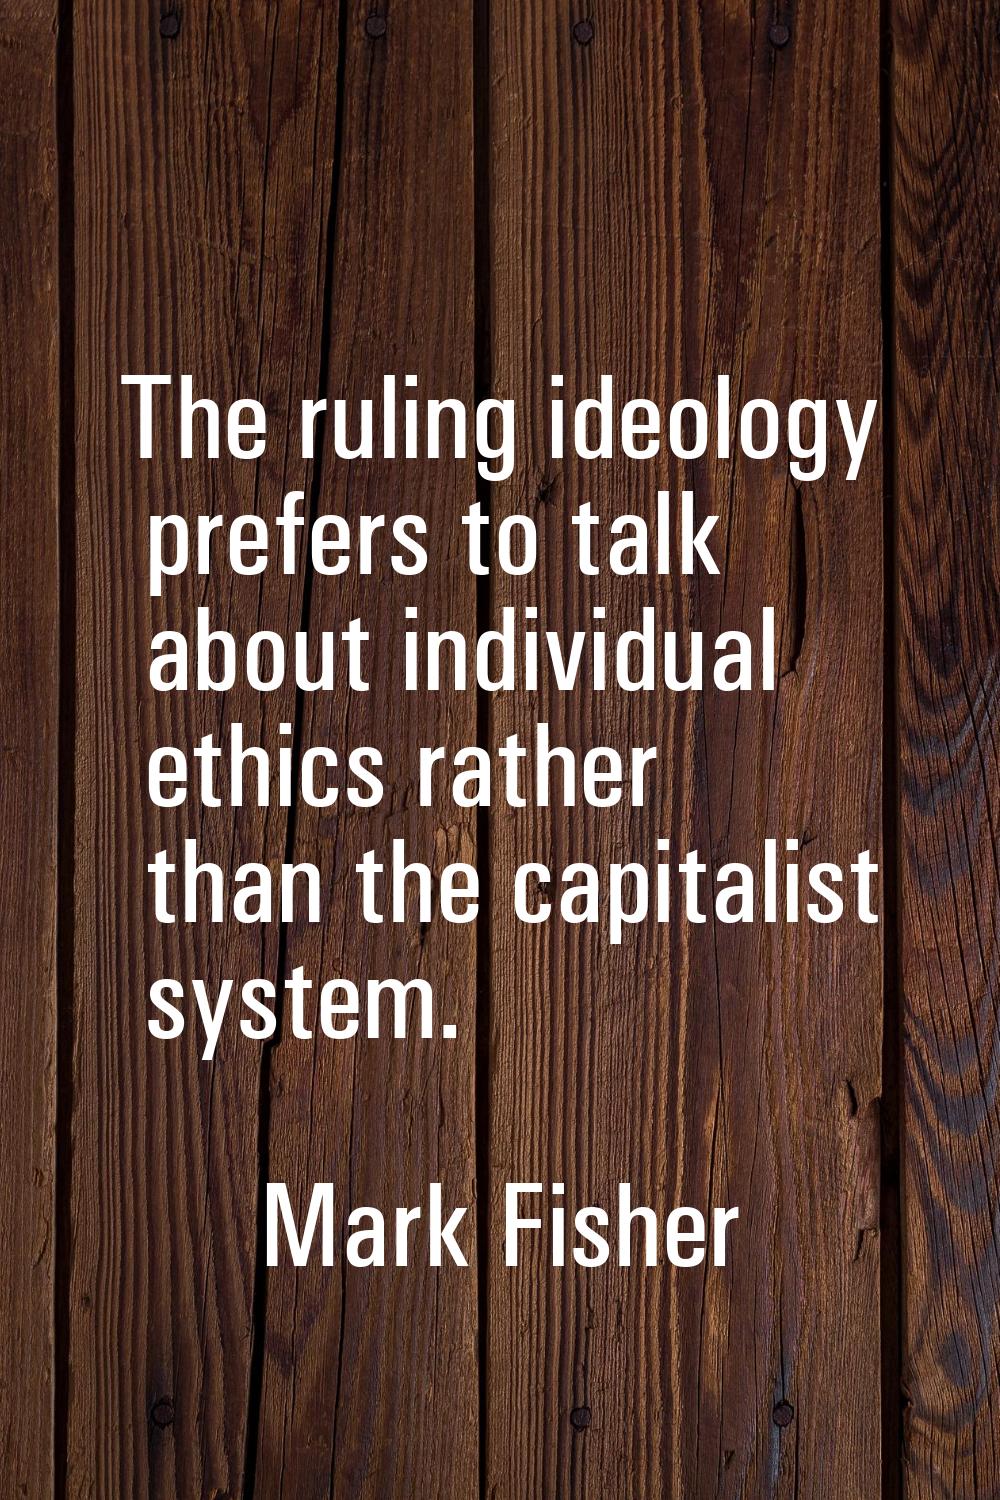 The ruling ideology prefers to talk about individual ethics rather than the capitalist system.